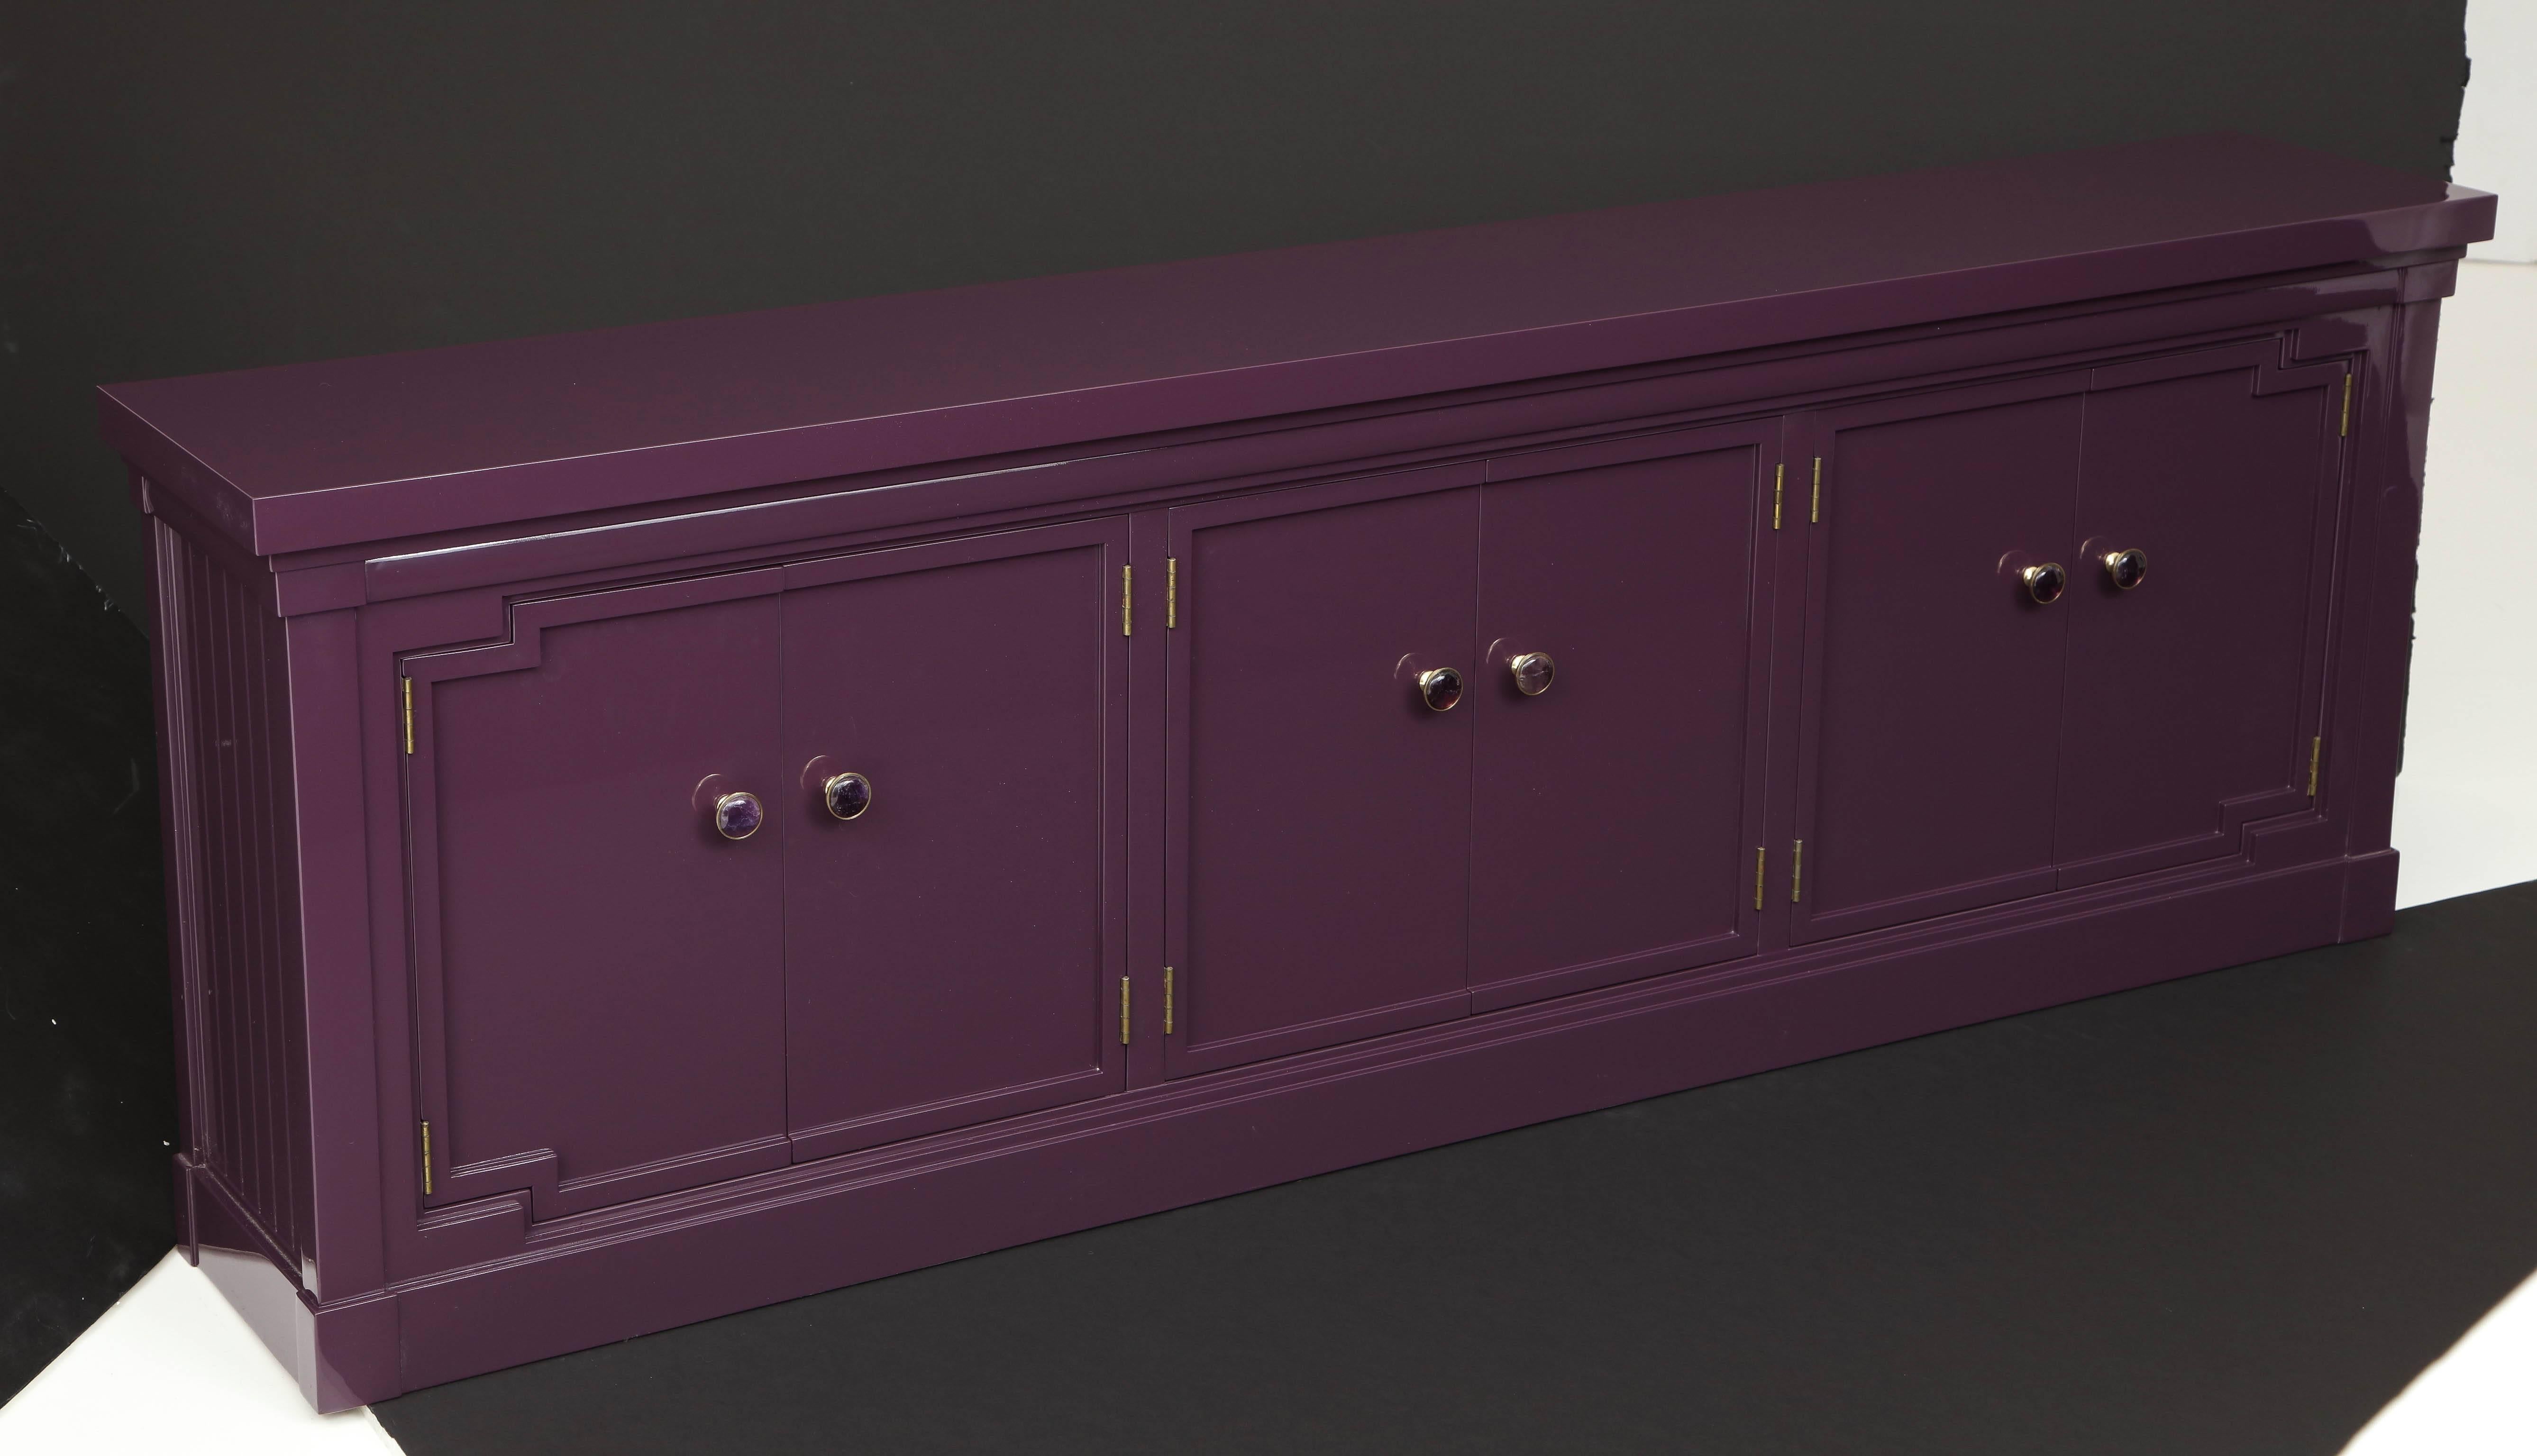 Custom refinished cabinet or console in a deep jewel tone Amethyst lacquer with brass pulls with cabochon Amethyst centers. Cabinet has three compartments, each housing an adjustable shelf.